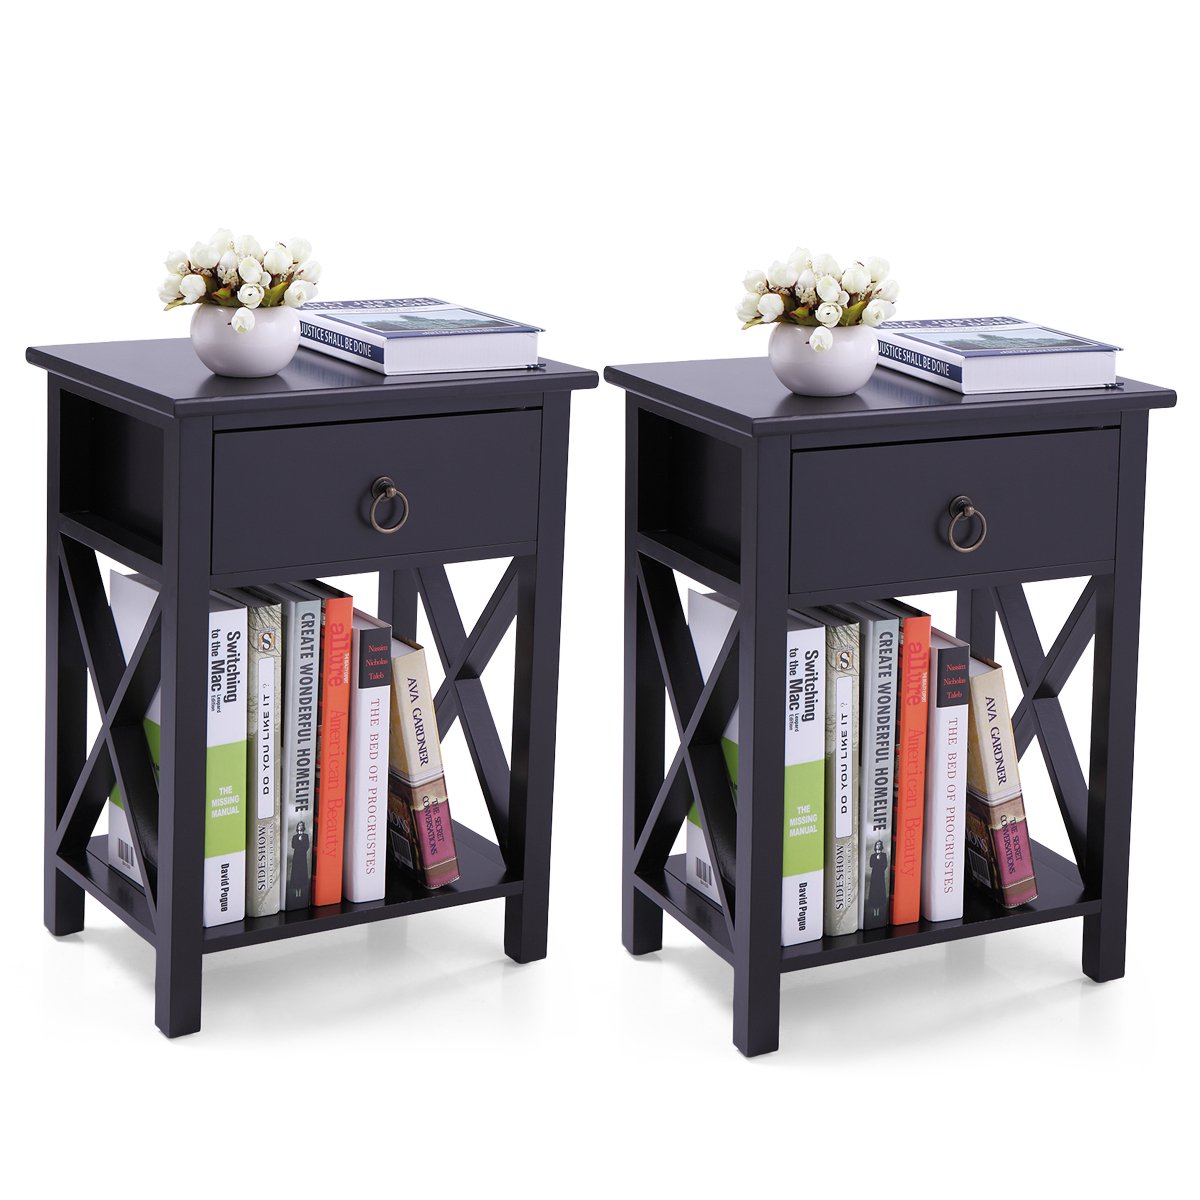 2PCS Rustic Nightstand with Drawers, Modern Wood Side Table with X-Shape Metal Sides, Rustic White End Table Furniture for Living Room Bedroom Office